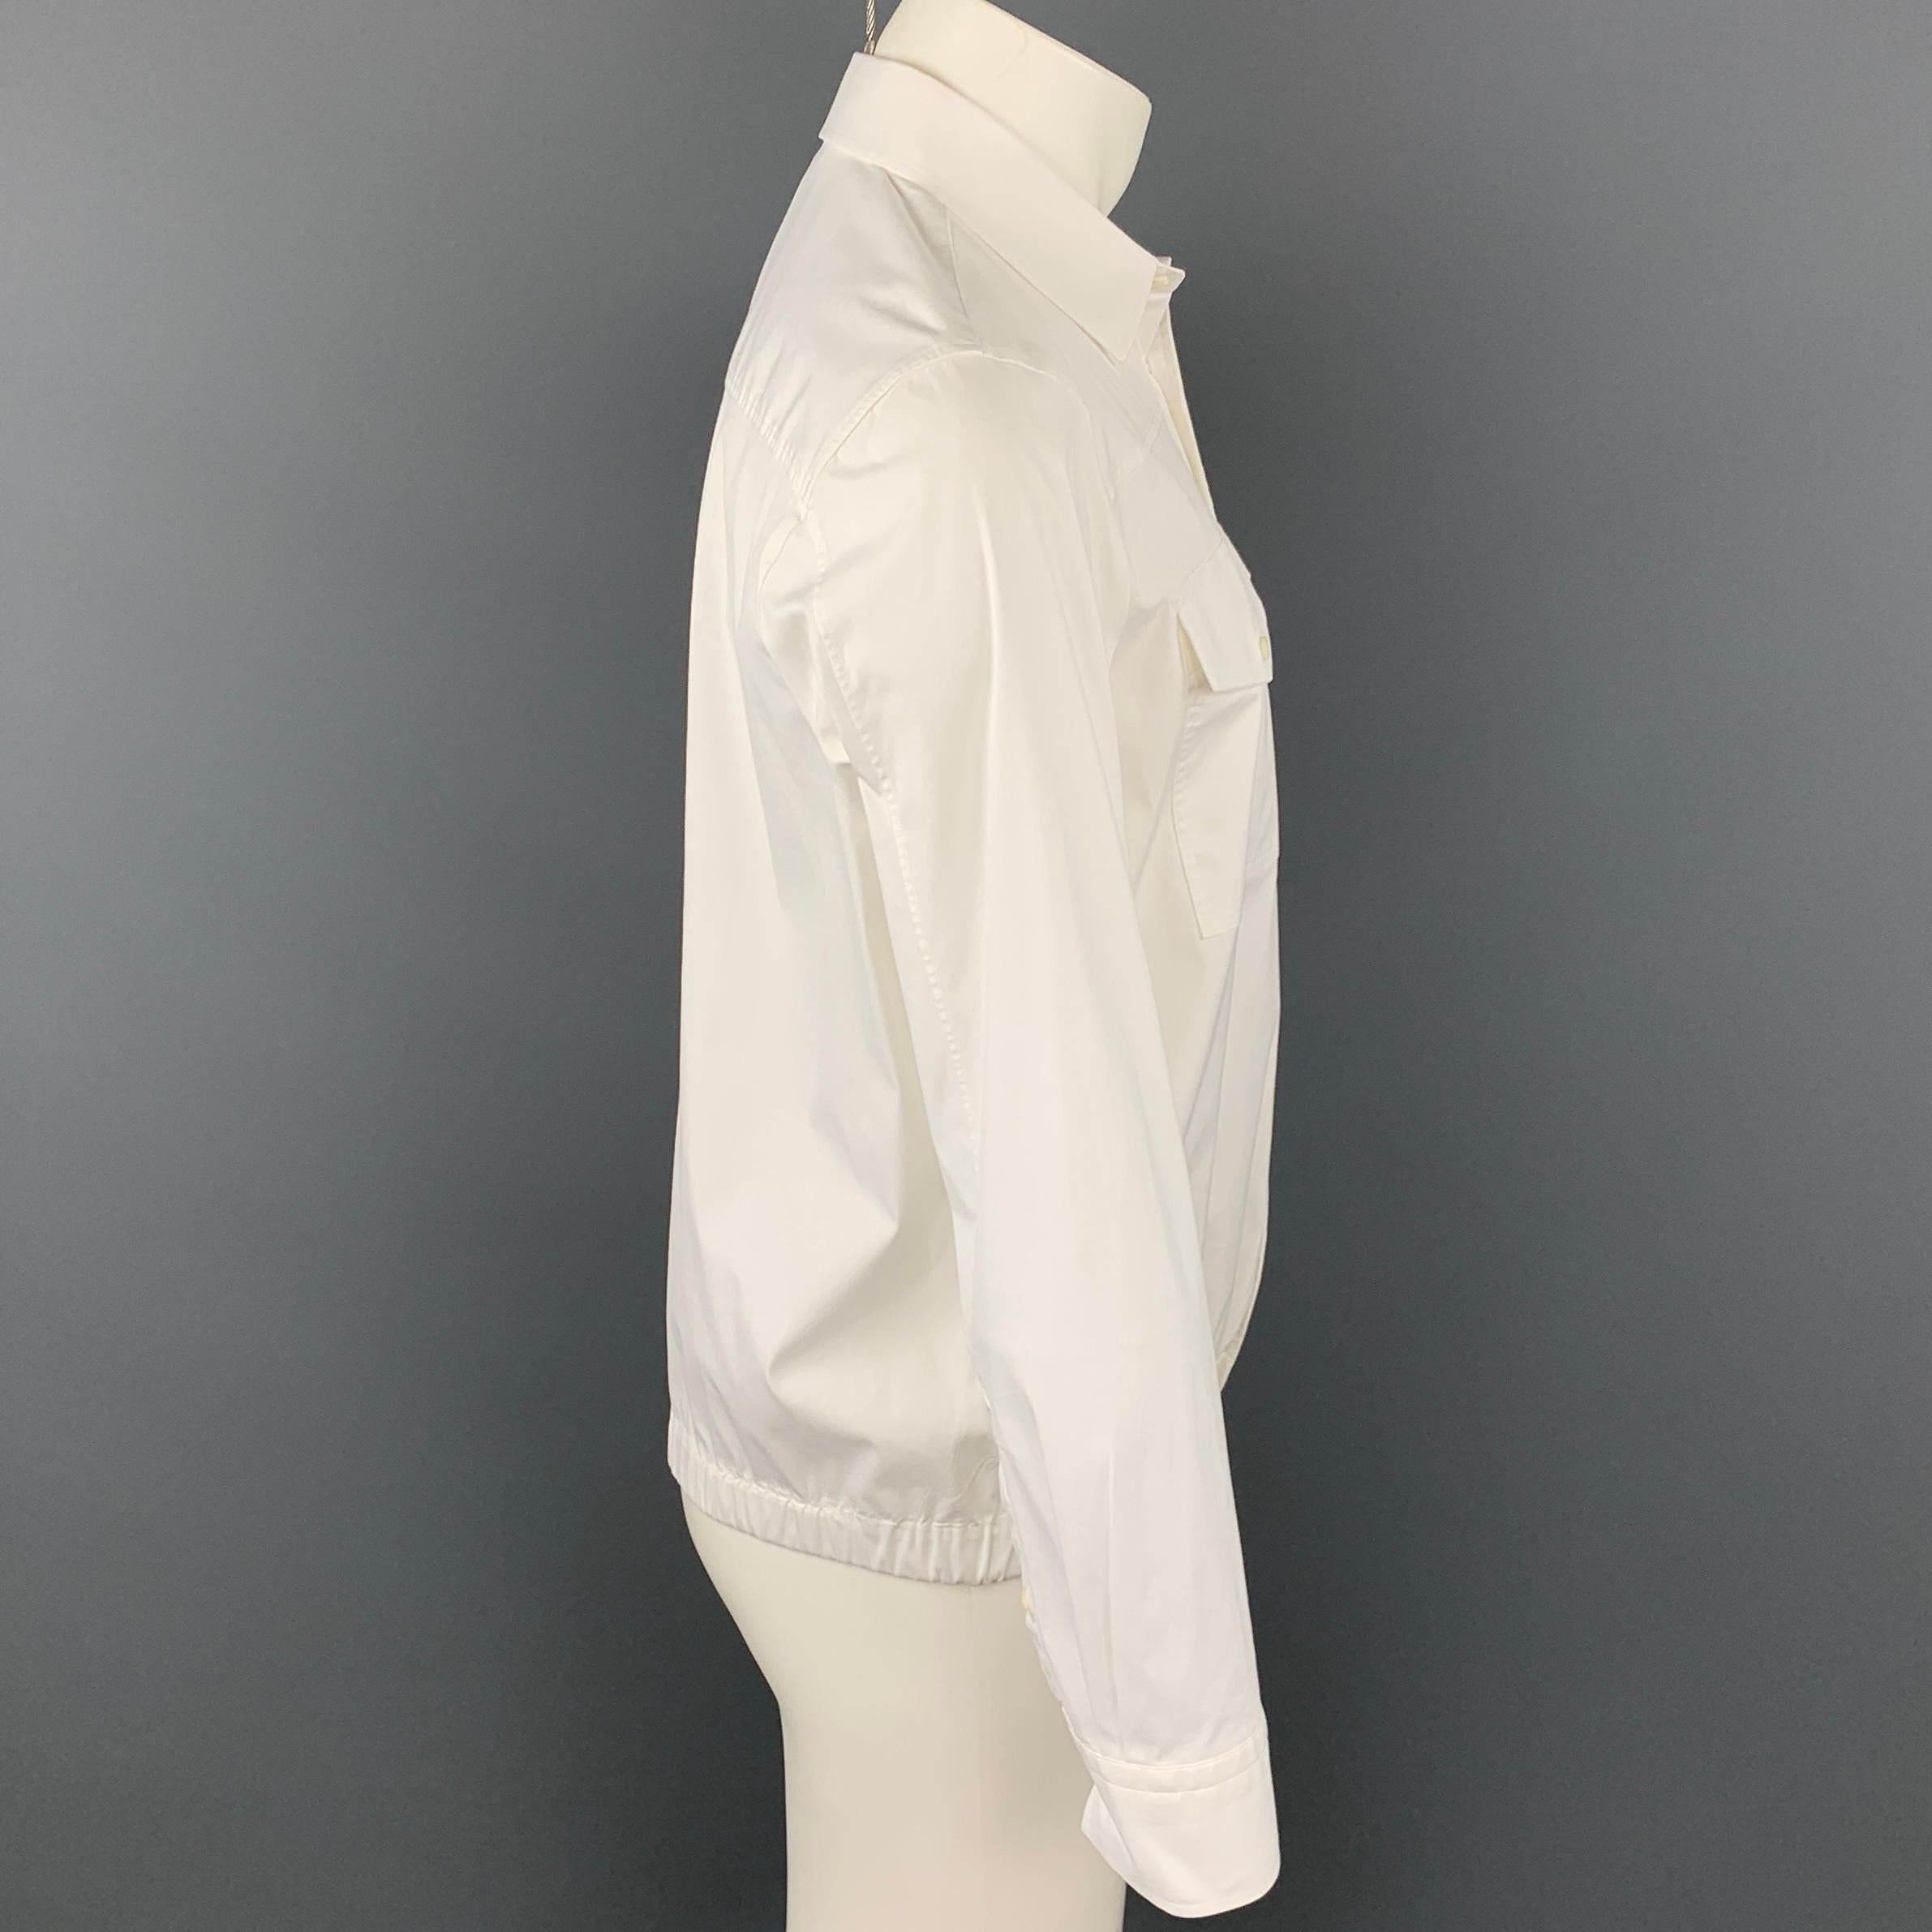 NEIL BARRET long sleeve shirt comes in a white cotton blend featuring a loose fi, elastic waistband, button up, and a spread collar.

Very Good Pre-Owned Condition.
Marked: L

Measurements:

Shoulder: 18 in.
Chest: 46 in.
Sleeve: 25.5 in.
Length: 25